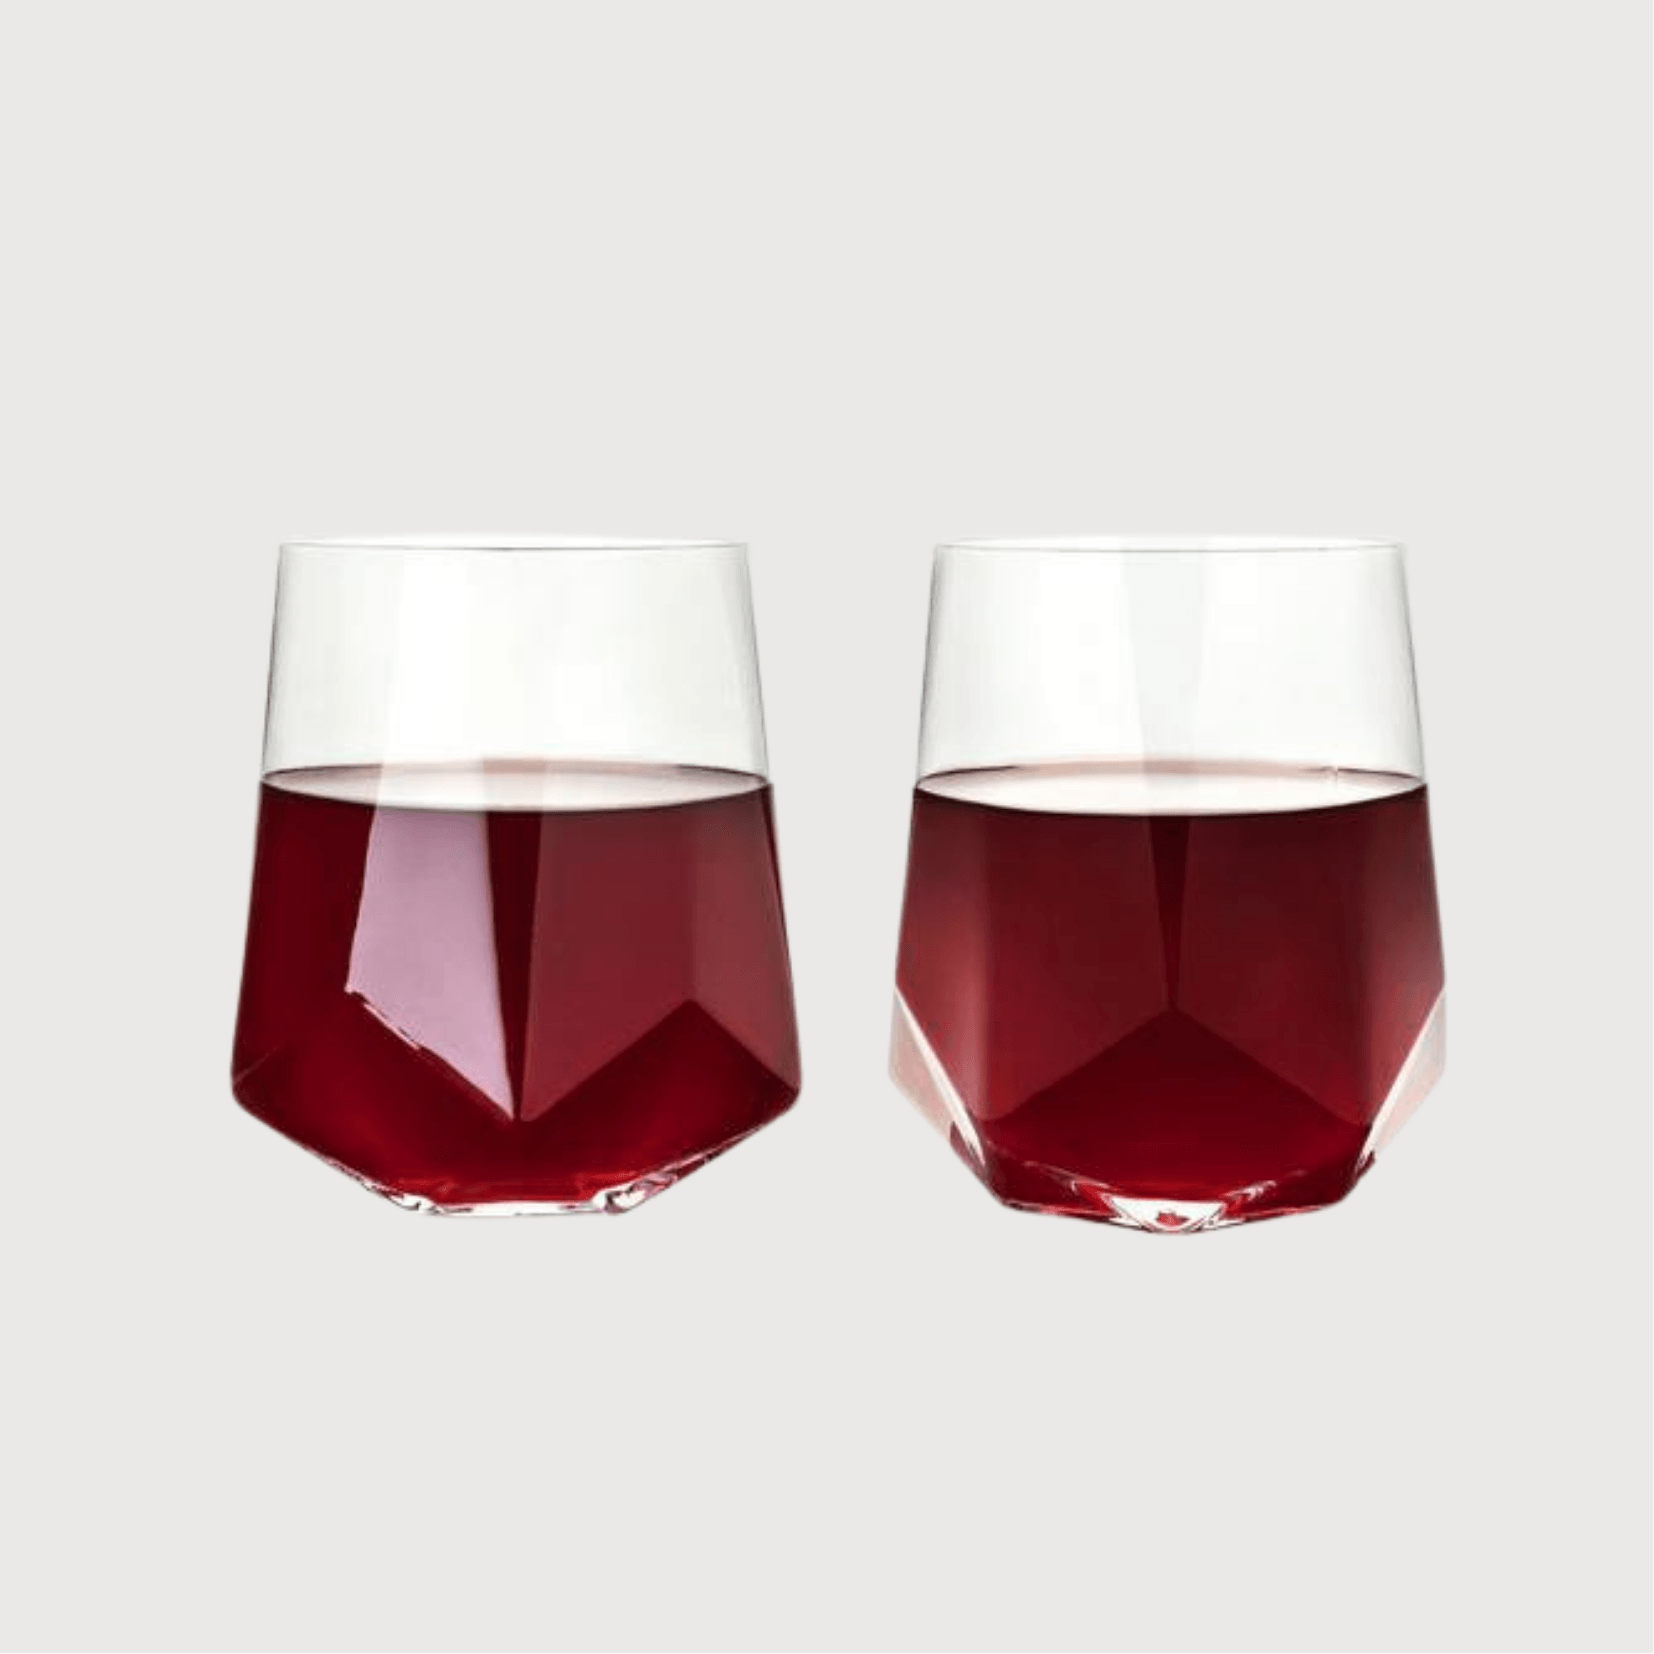 Double Walled Stemless Wine Glasses by Viski, Set of 2